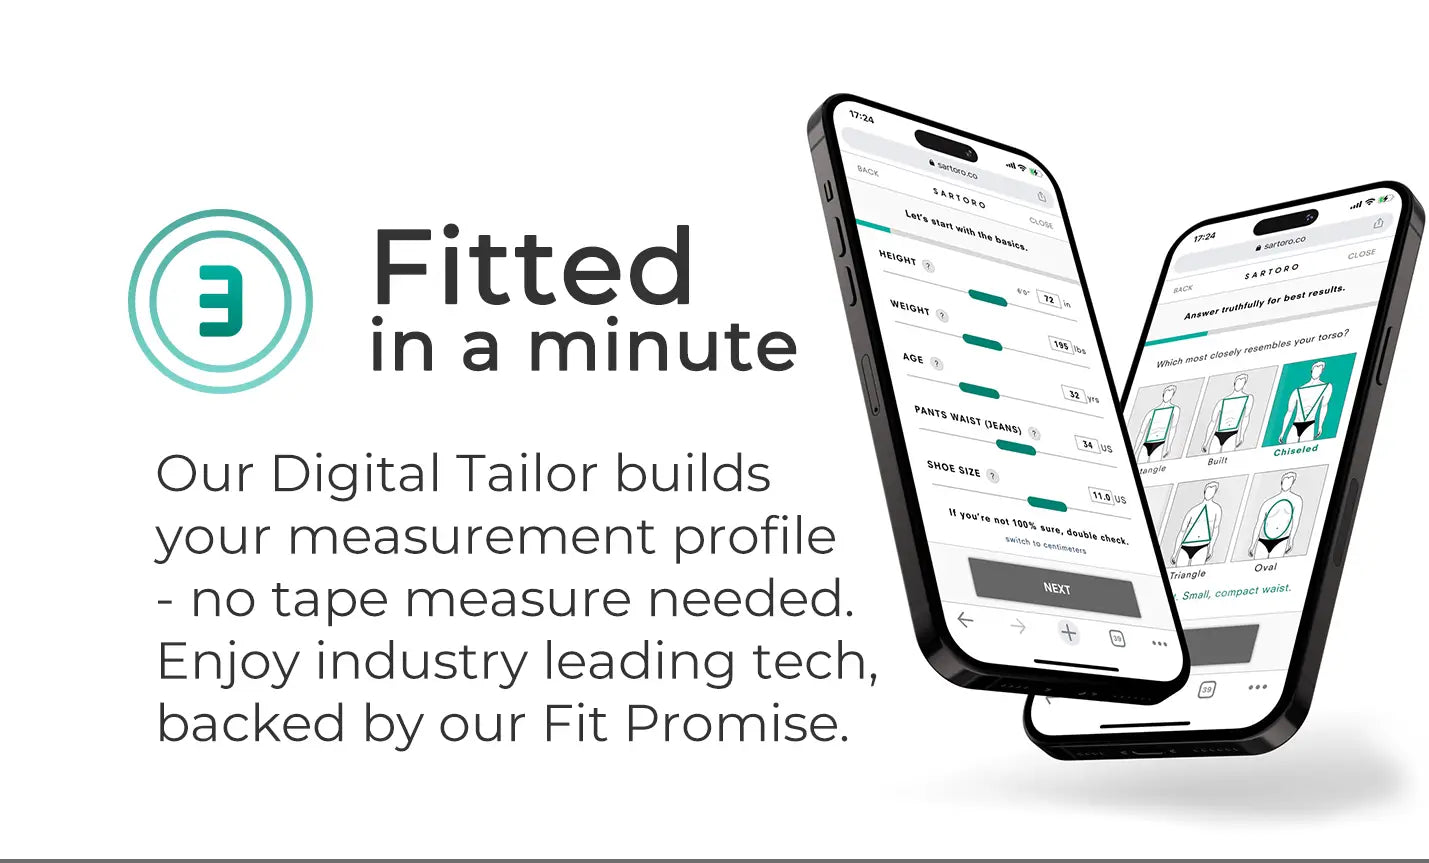 Get fitted in a minute with our Digital Tailor. The system builds your measurement profile - no tape measure needed. Backed by our Fit Promise.